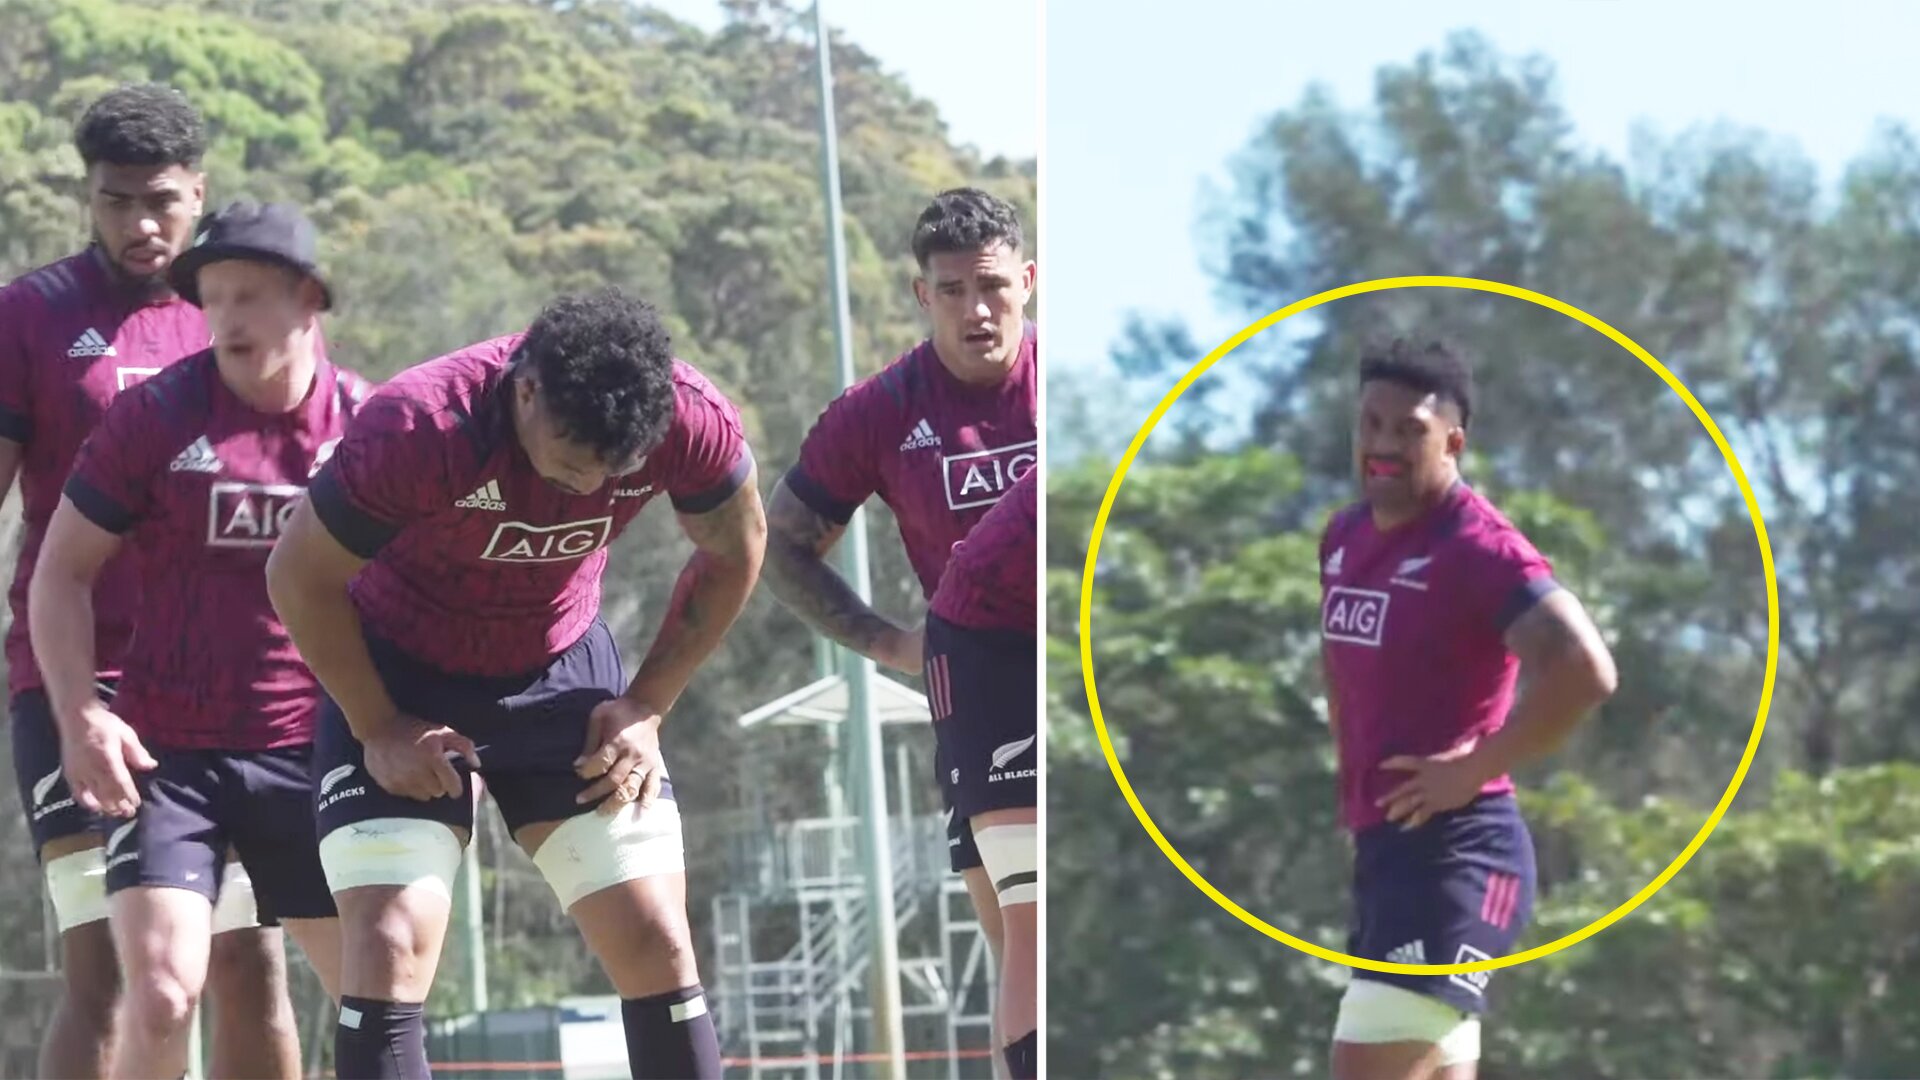 People are worried about Ardie Savea after new All Blacks training footage emerges